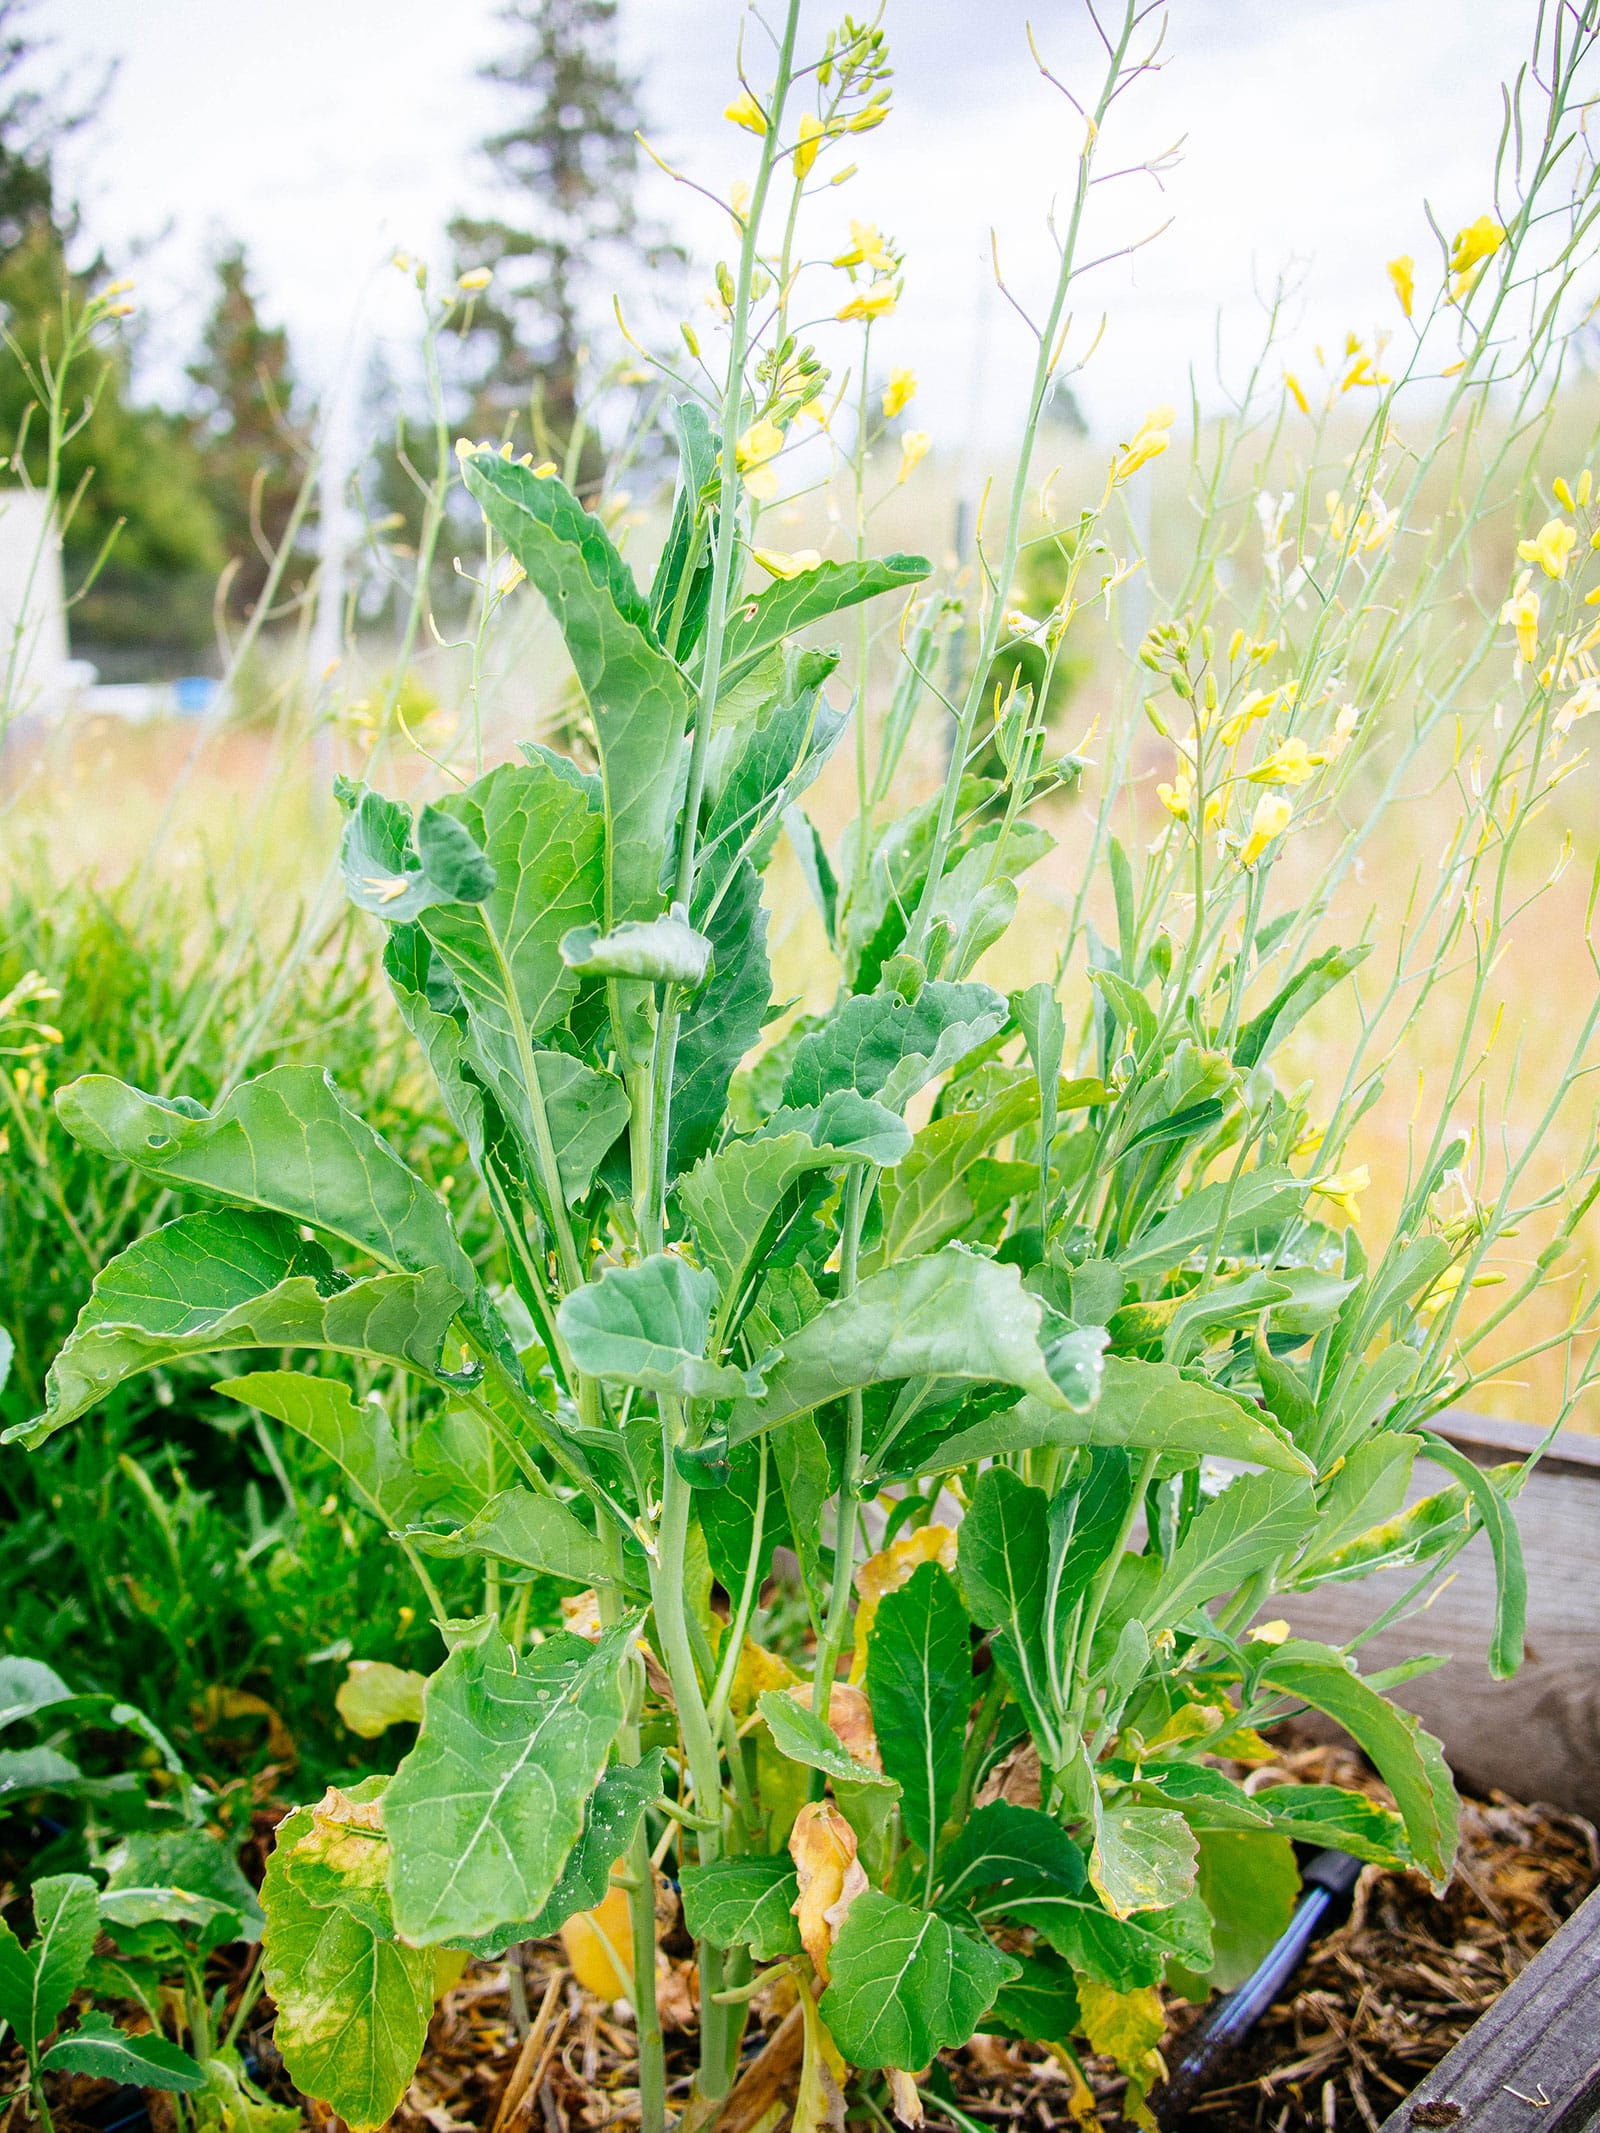 Bolted kale plant with multiple flower spikes going to seed